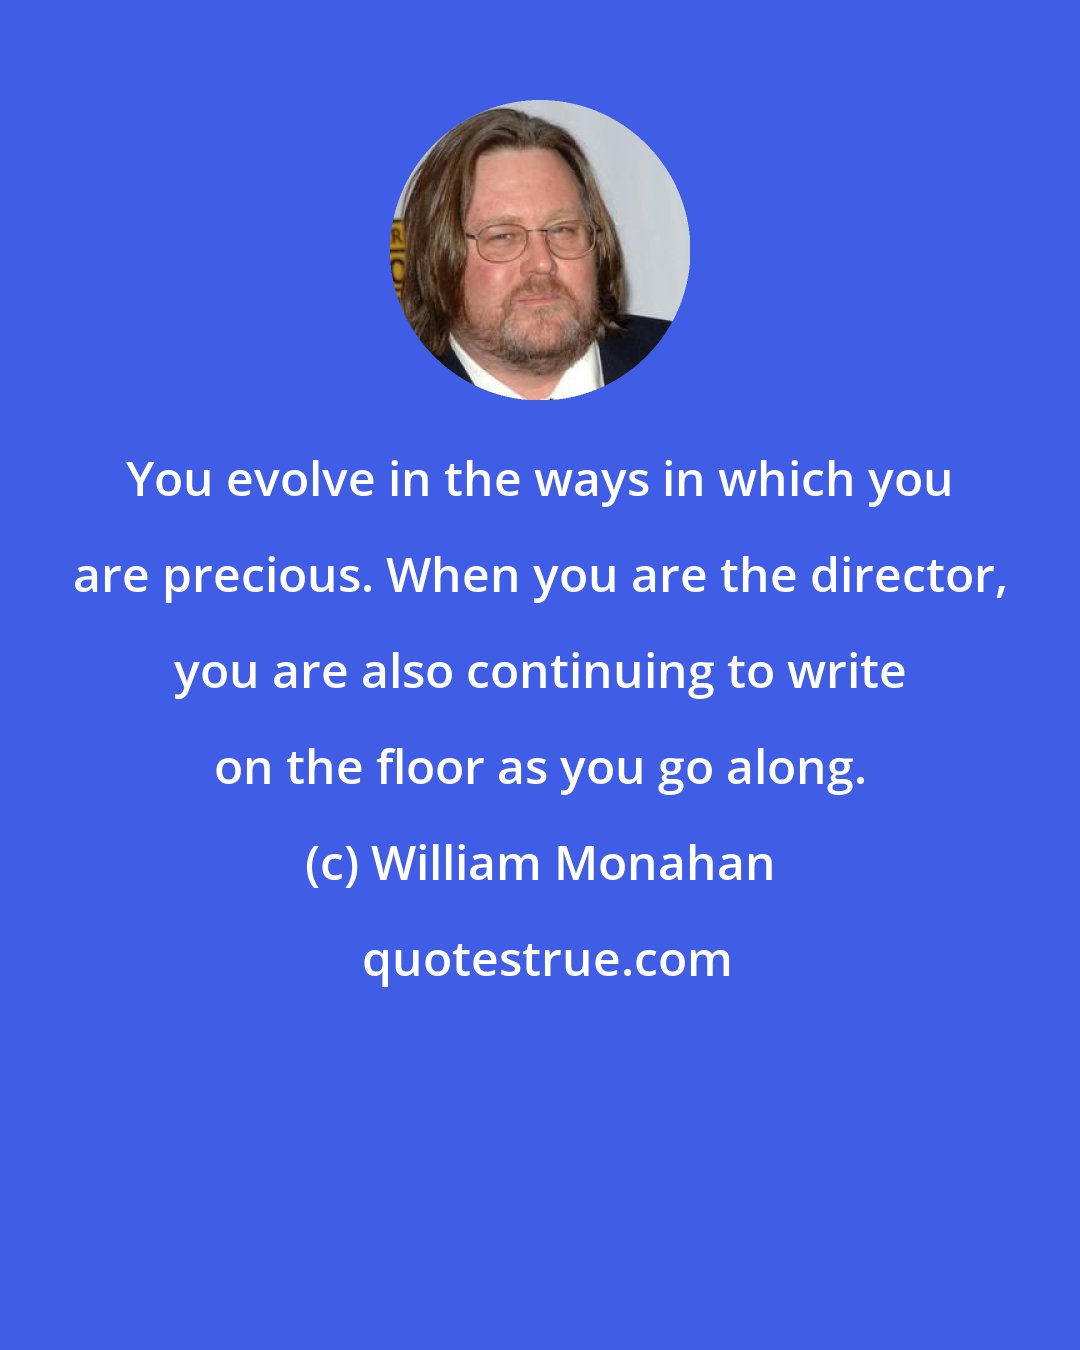 William Monahan: You evolve in the ways in which you are precious. When you are the director, you are also continuing to write on the floor as you go along.